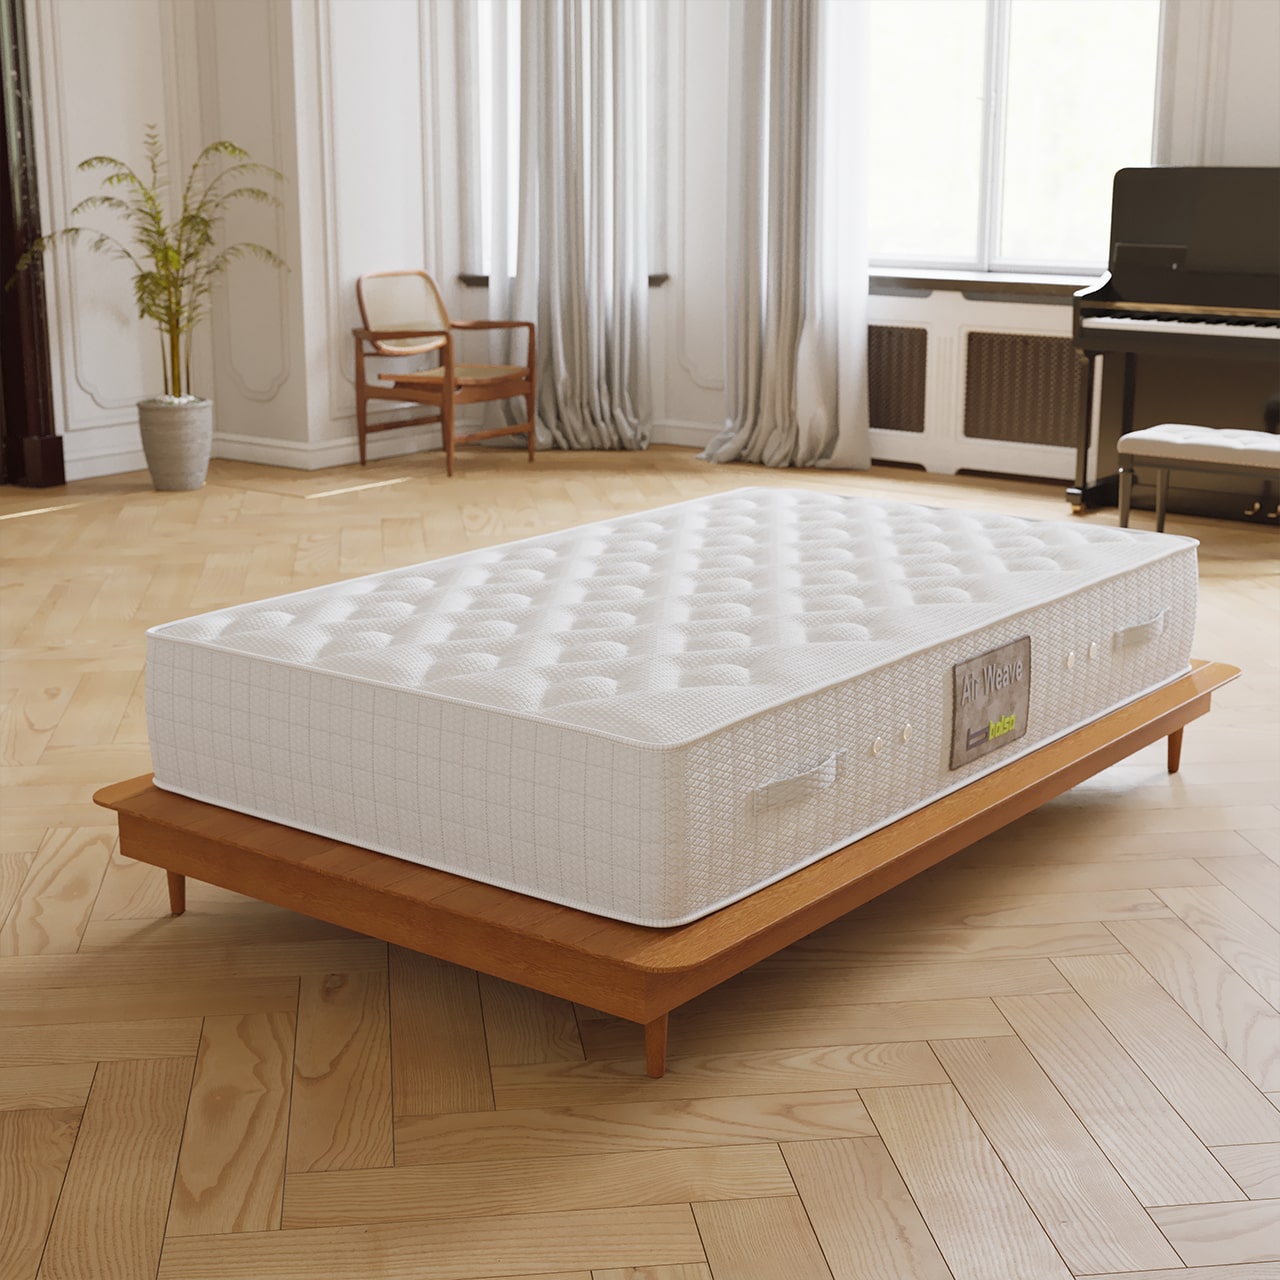 Balsa medical mattress for two and one person glamor model